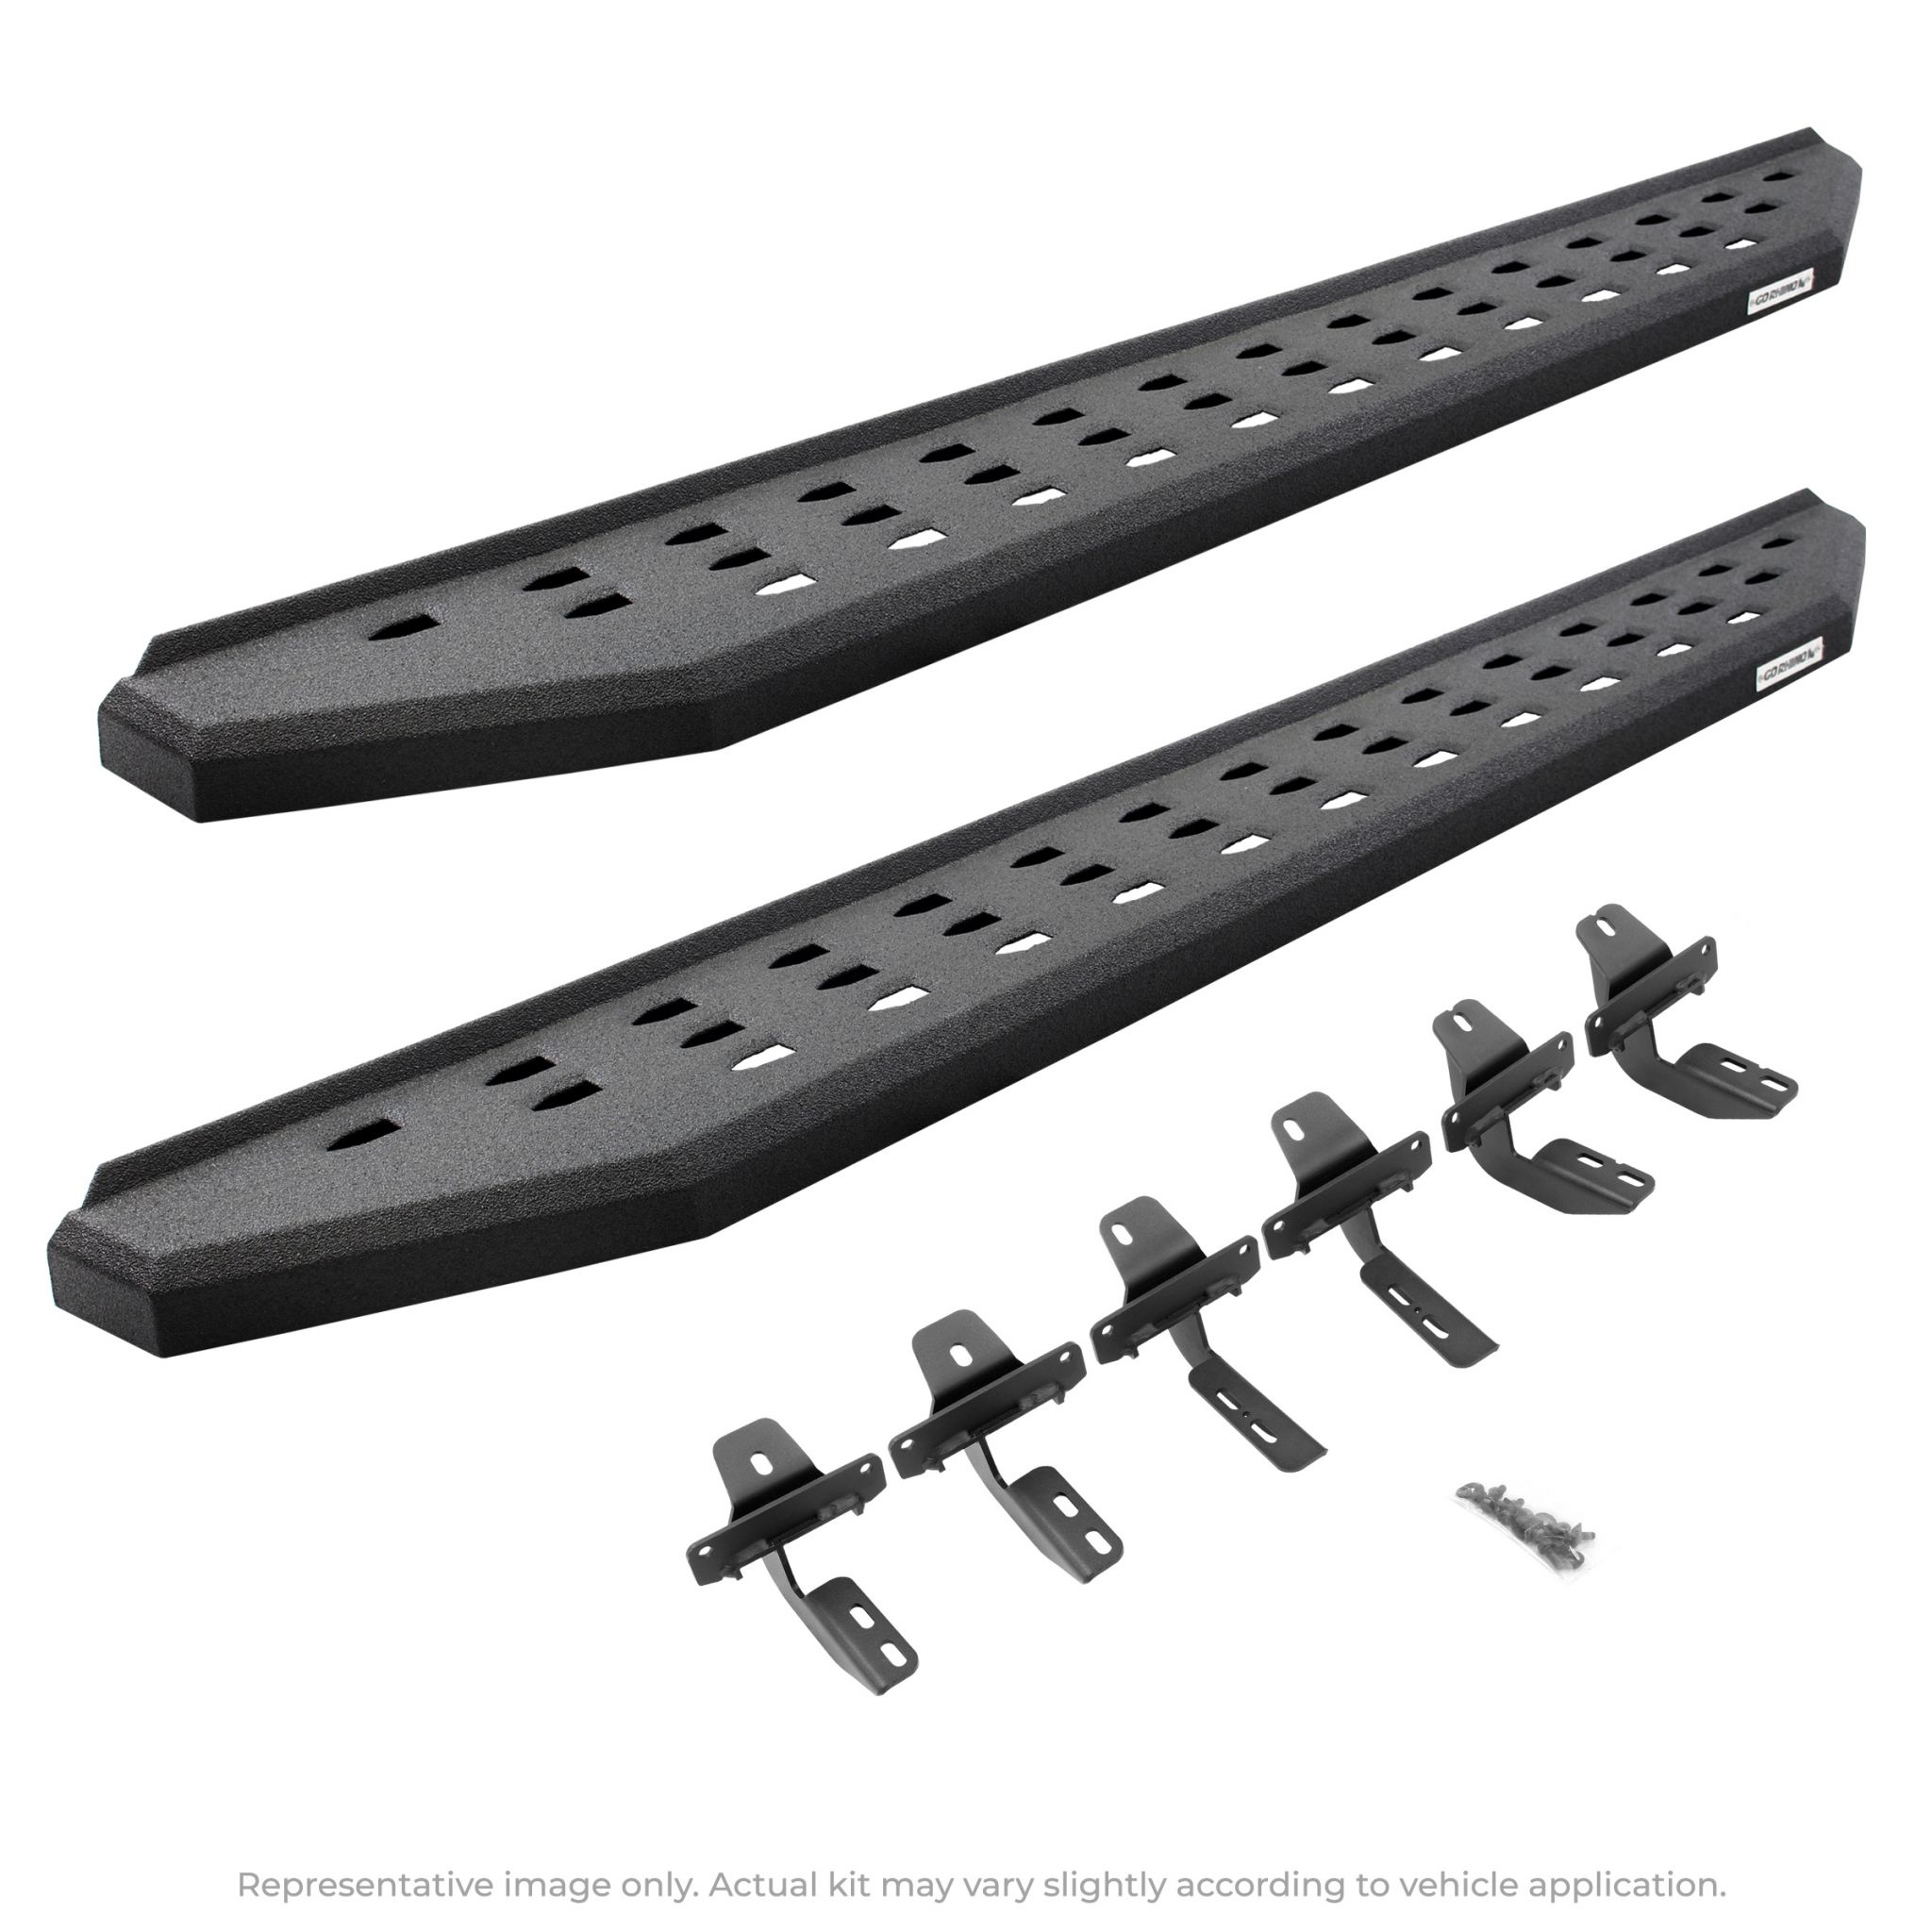 Go Rhino - 69409980T - RB20 Running Boards With Mounting Brackets - Protective Bedliner Coating